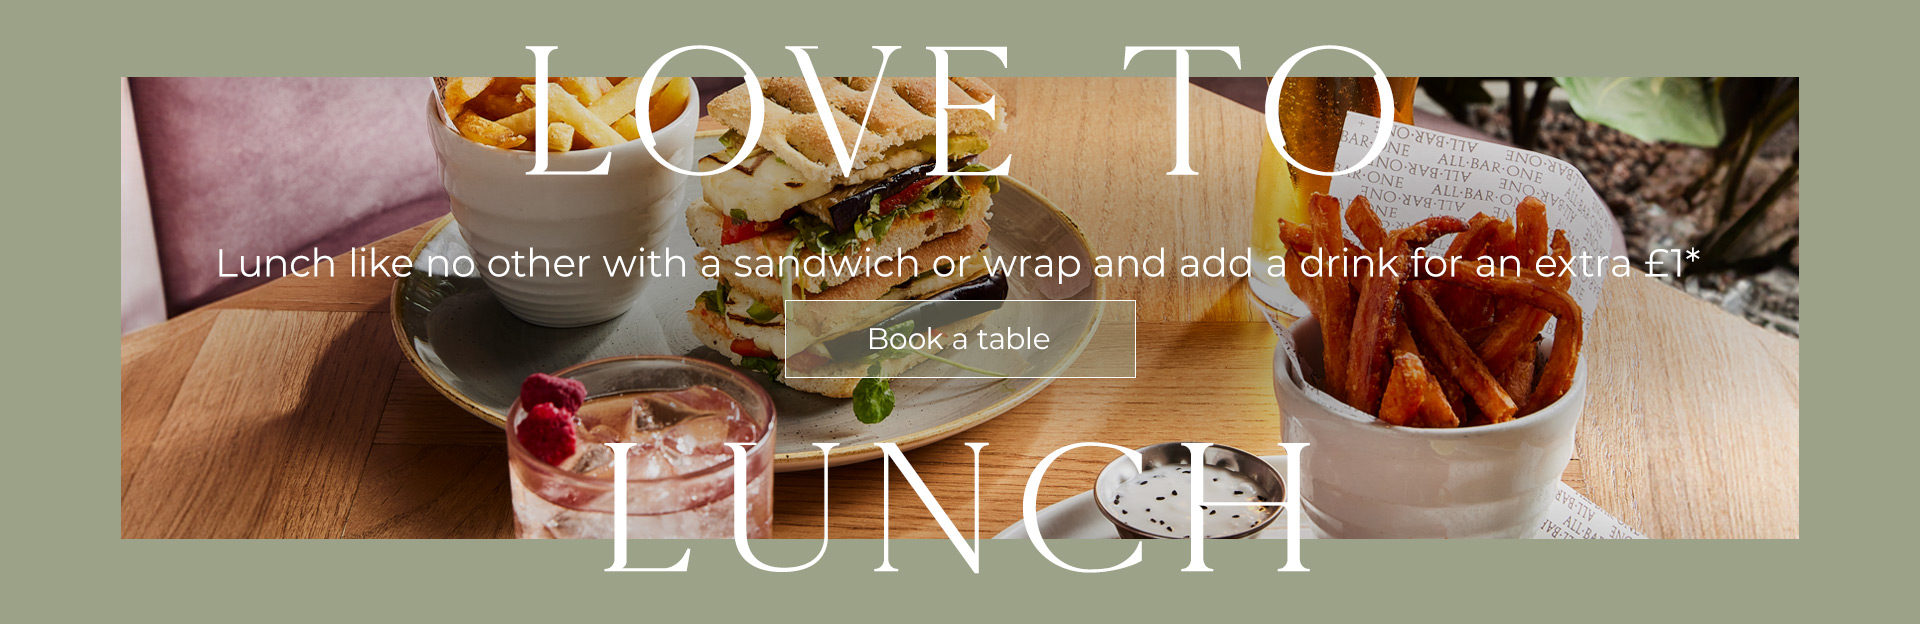 Lunch Offer at All Bar One Glasgow